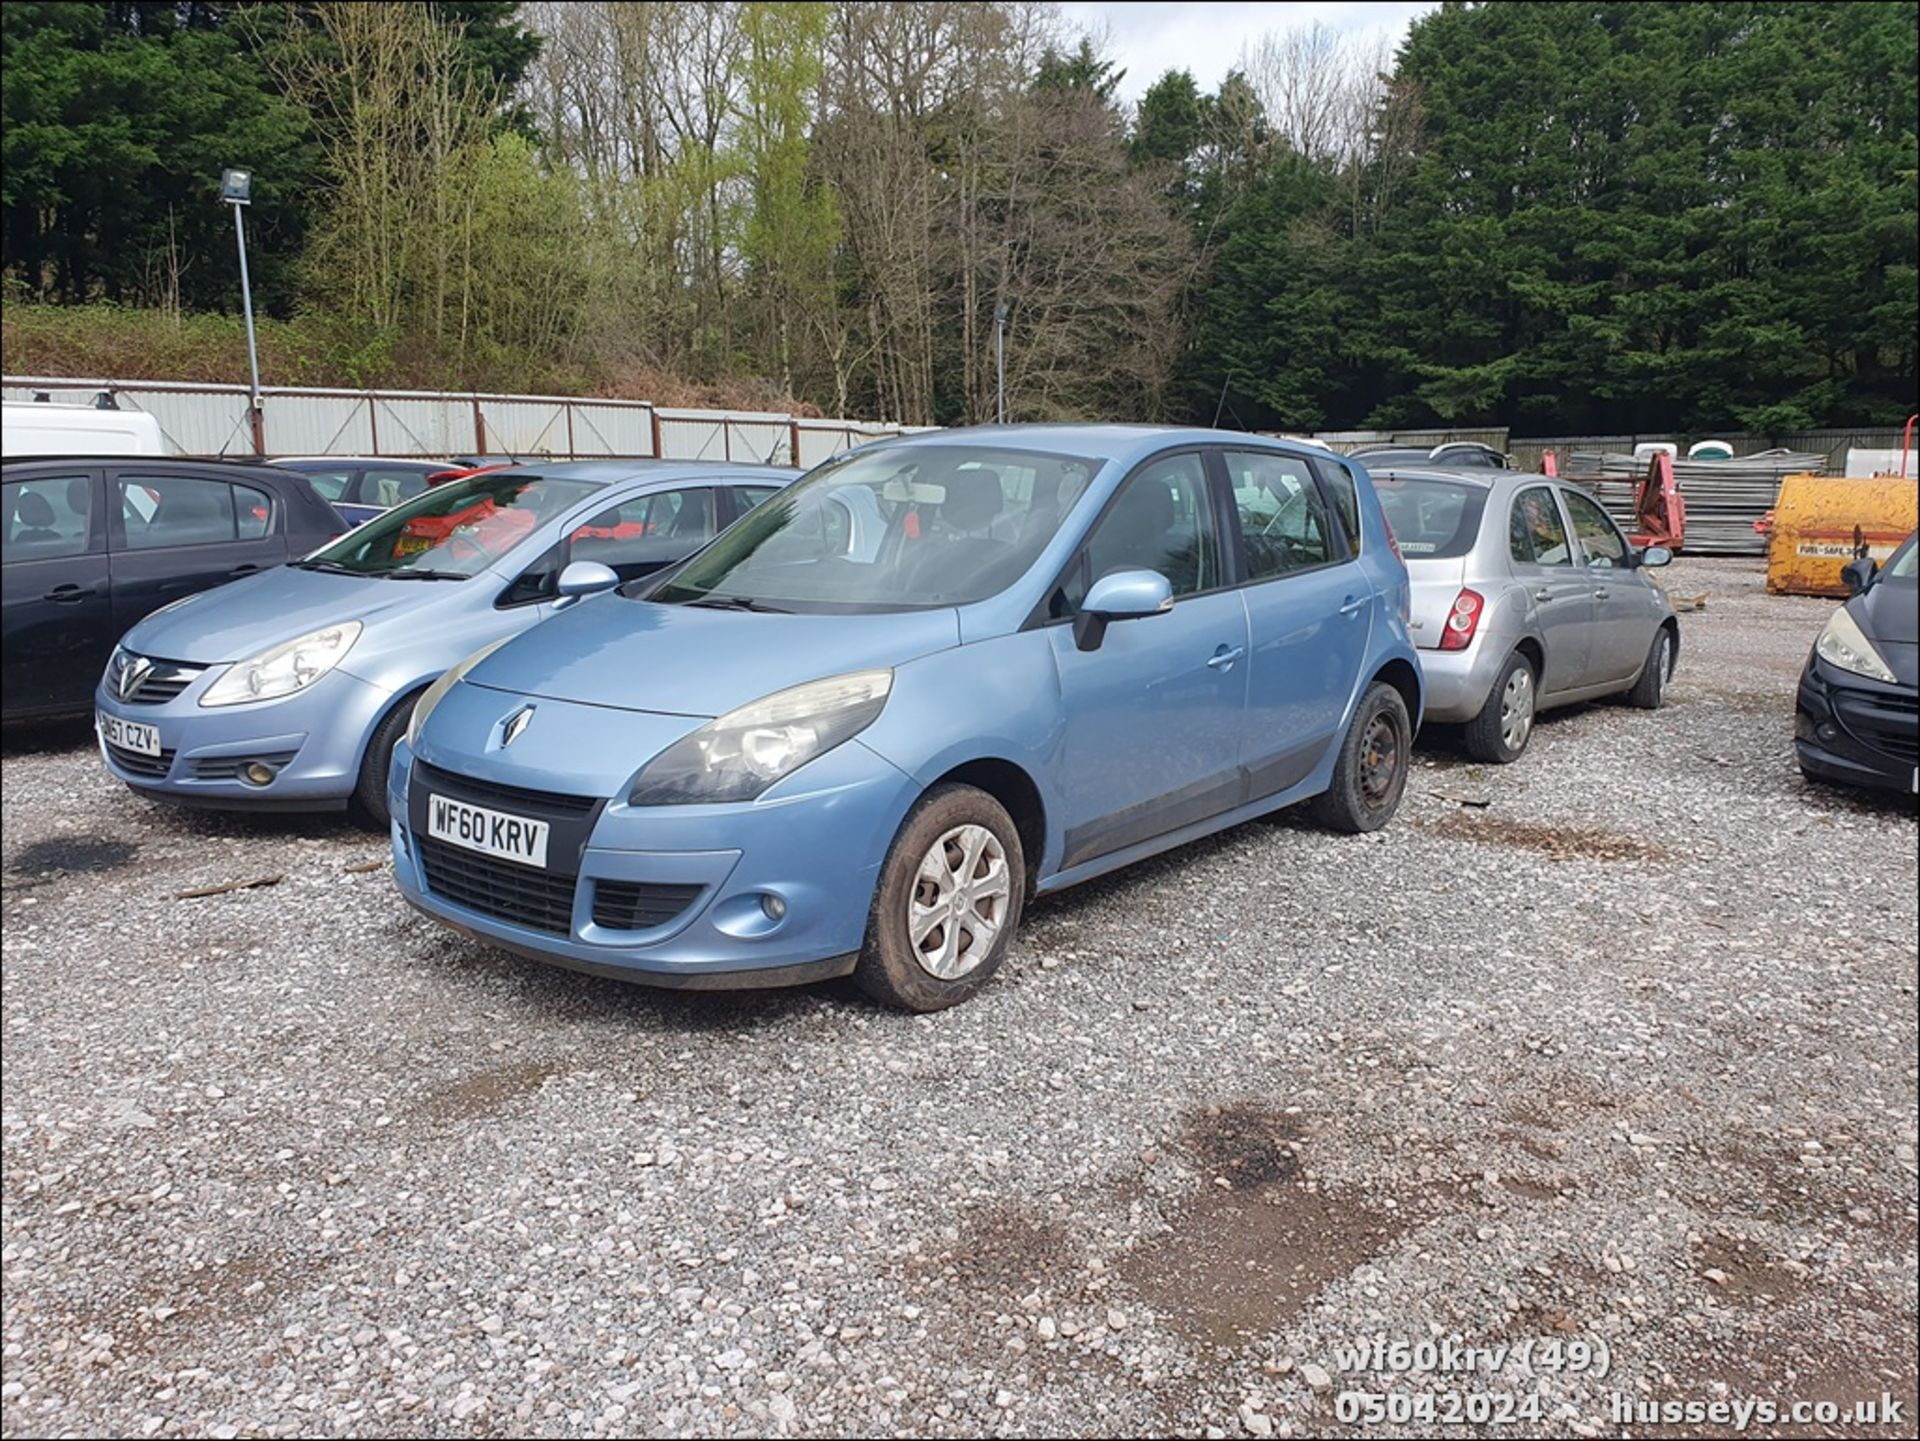 10/60 RENAULT SCENIC EXPRESSION DCI 105 - 1461cc 5dr MPV (Blue) - Image 50 of 50